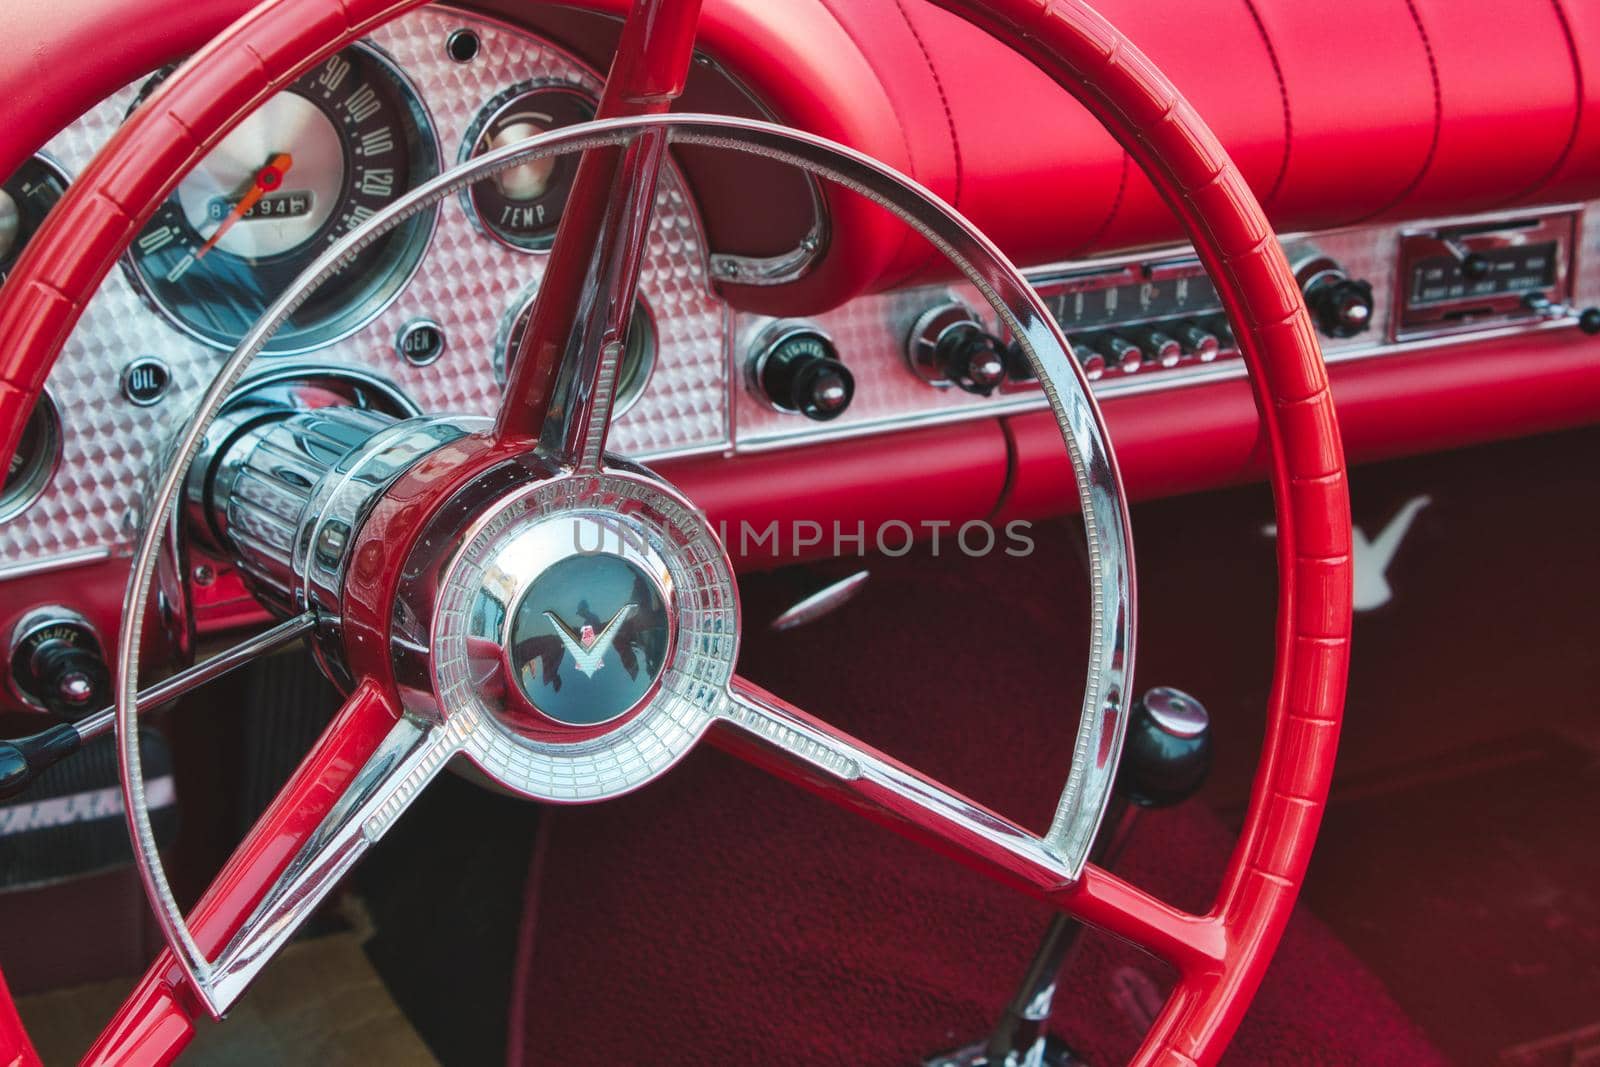 Rabat / Malta - July 24 2019: Close up of red steering wheel inside the cockpit of a Ford Thunderbird classic sports car by tennesseewitney